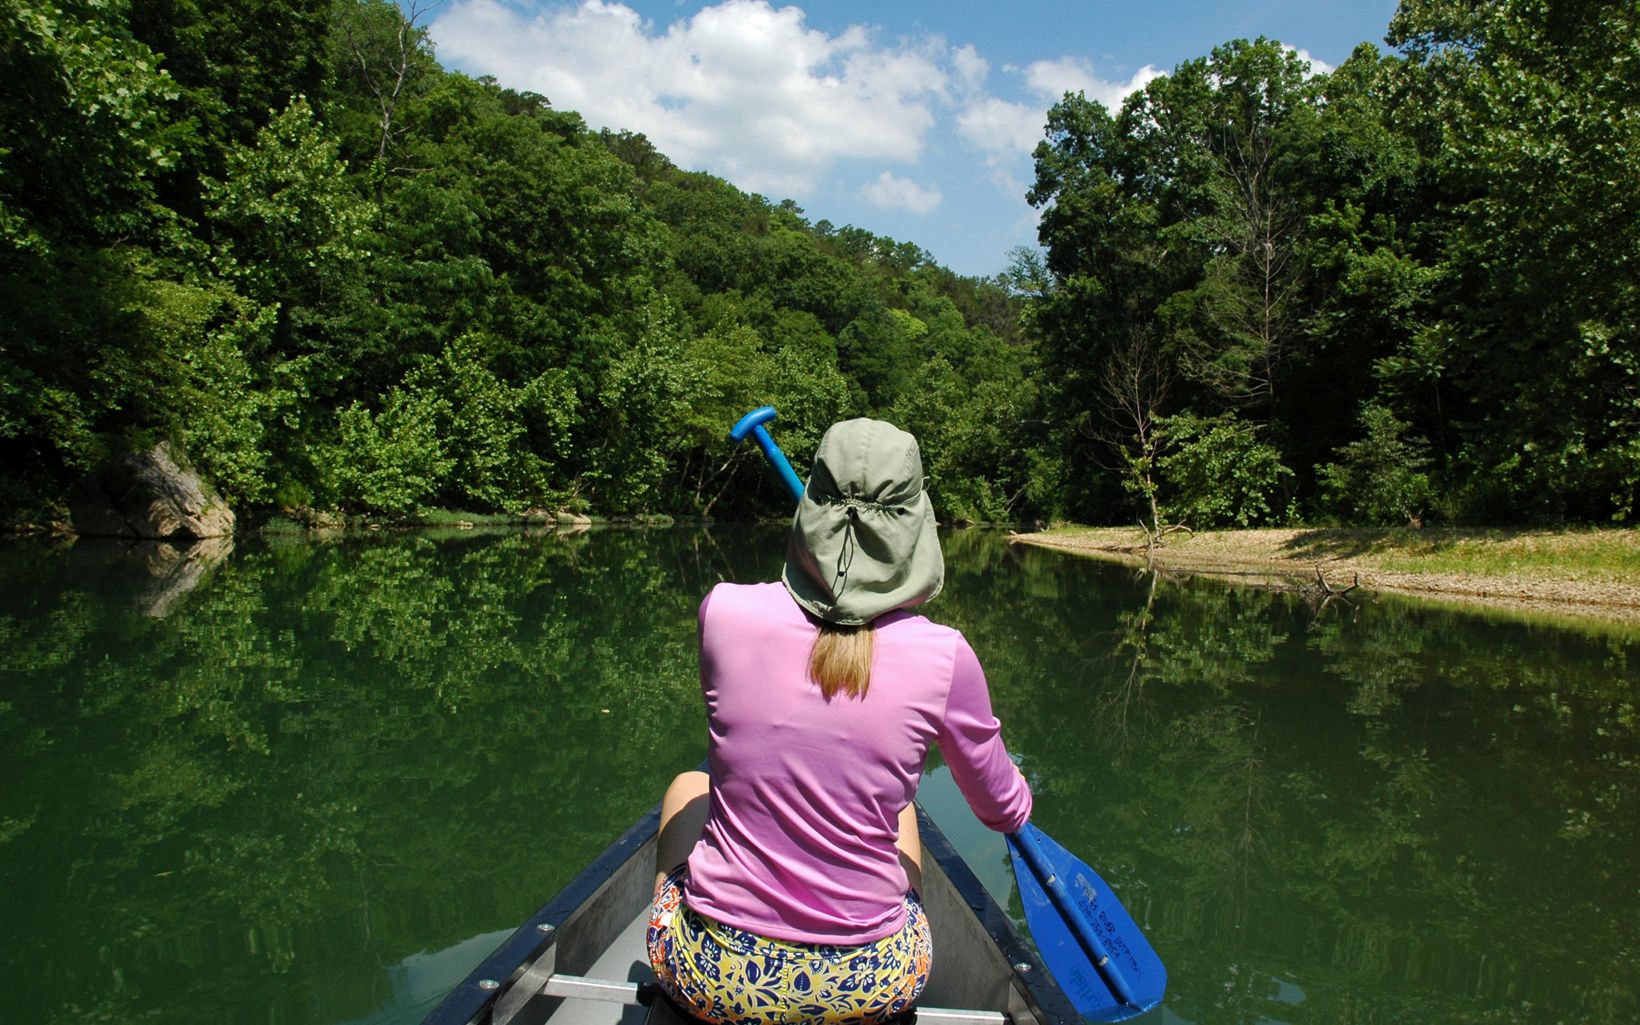 Canoeing on the Kings River in the Ozark Highlands of Arkansas. © The Nature Conservancy